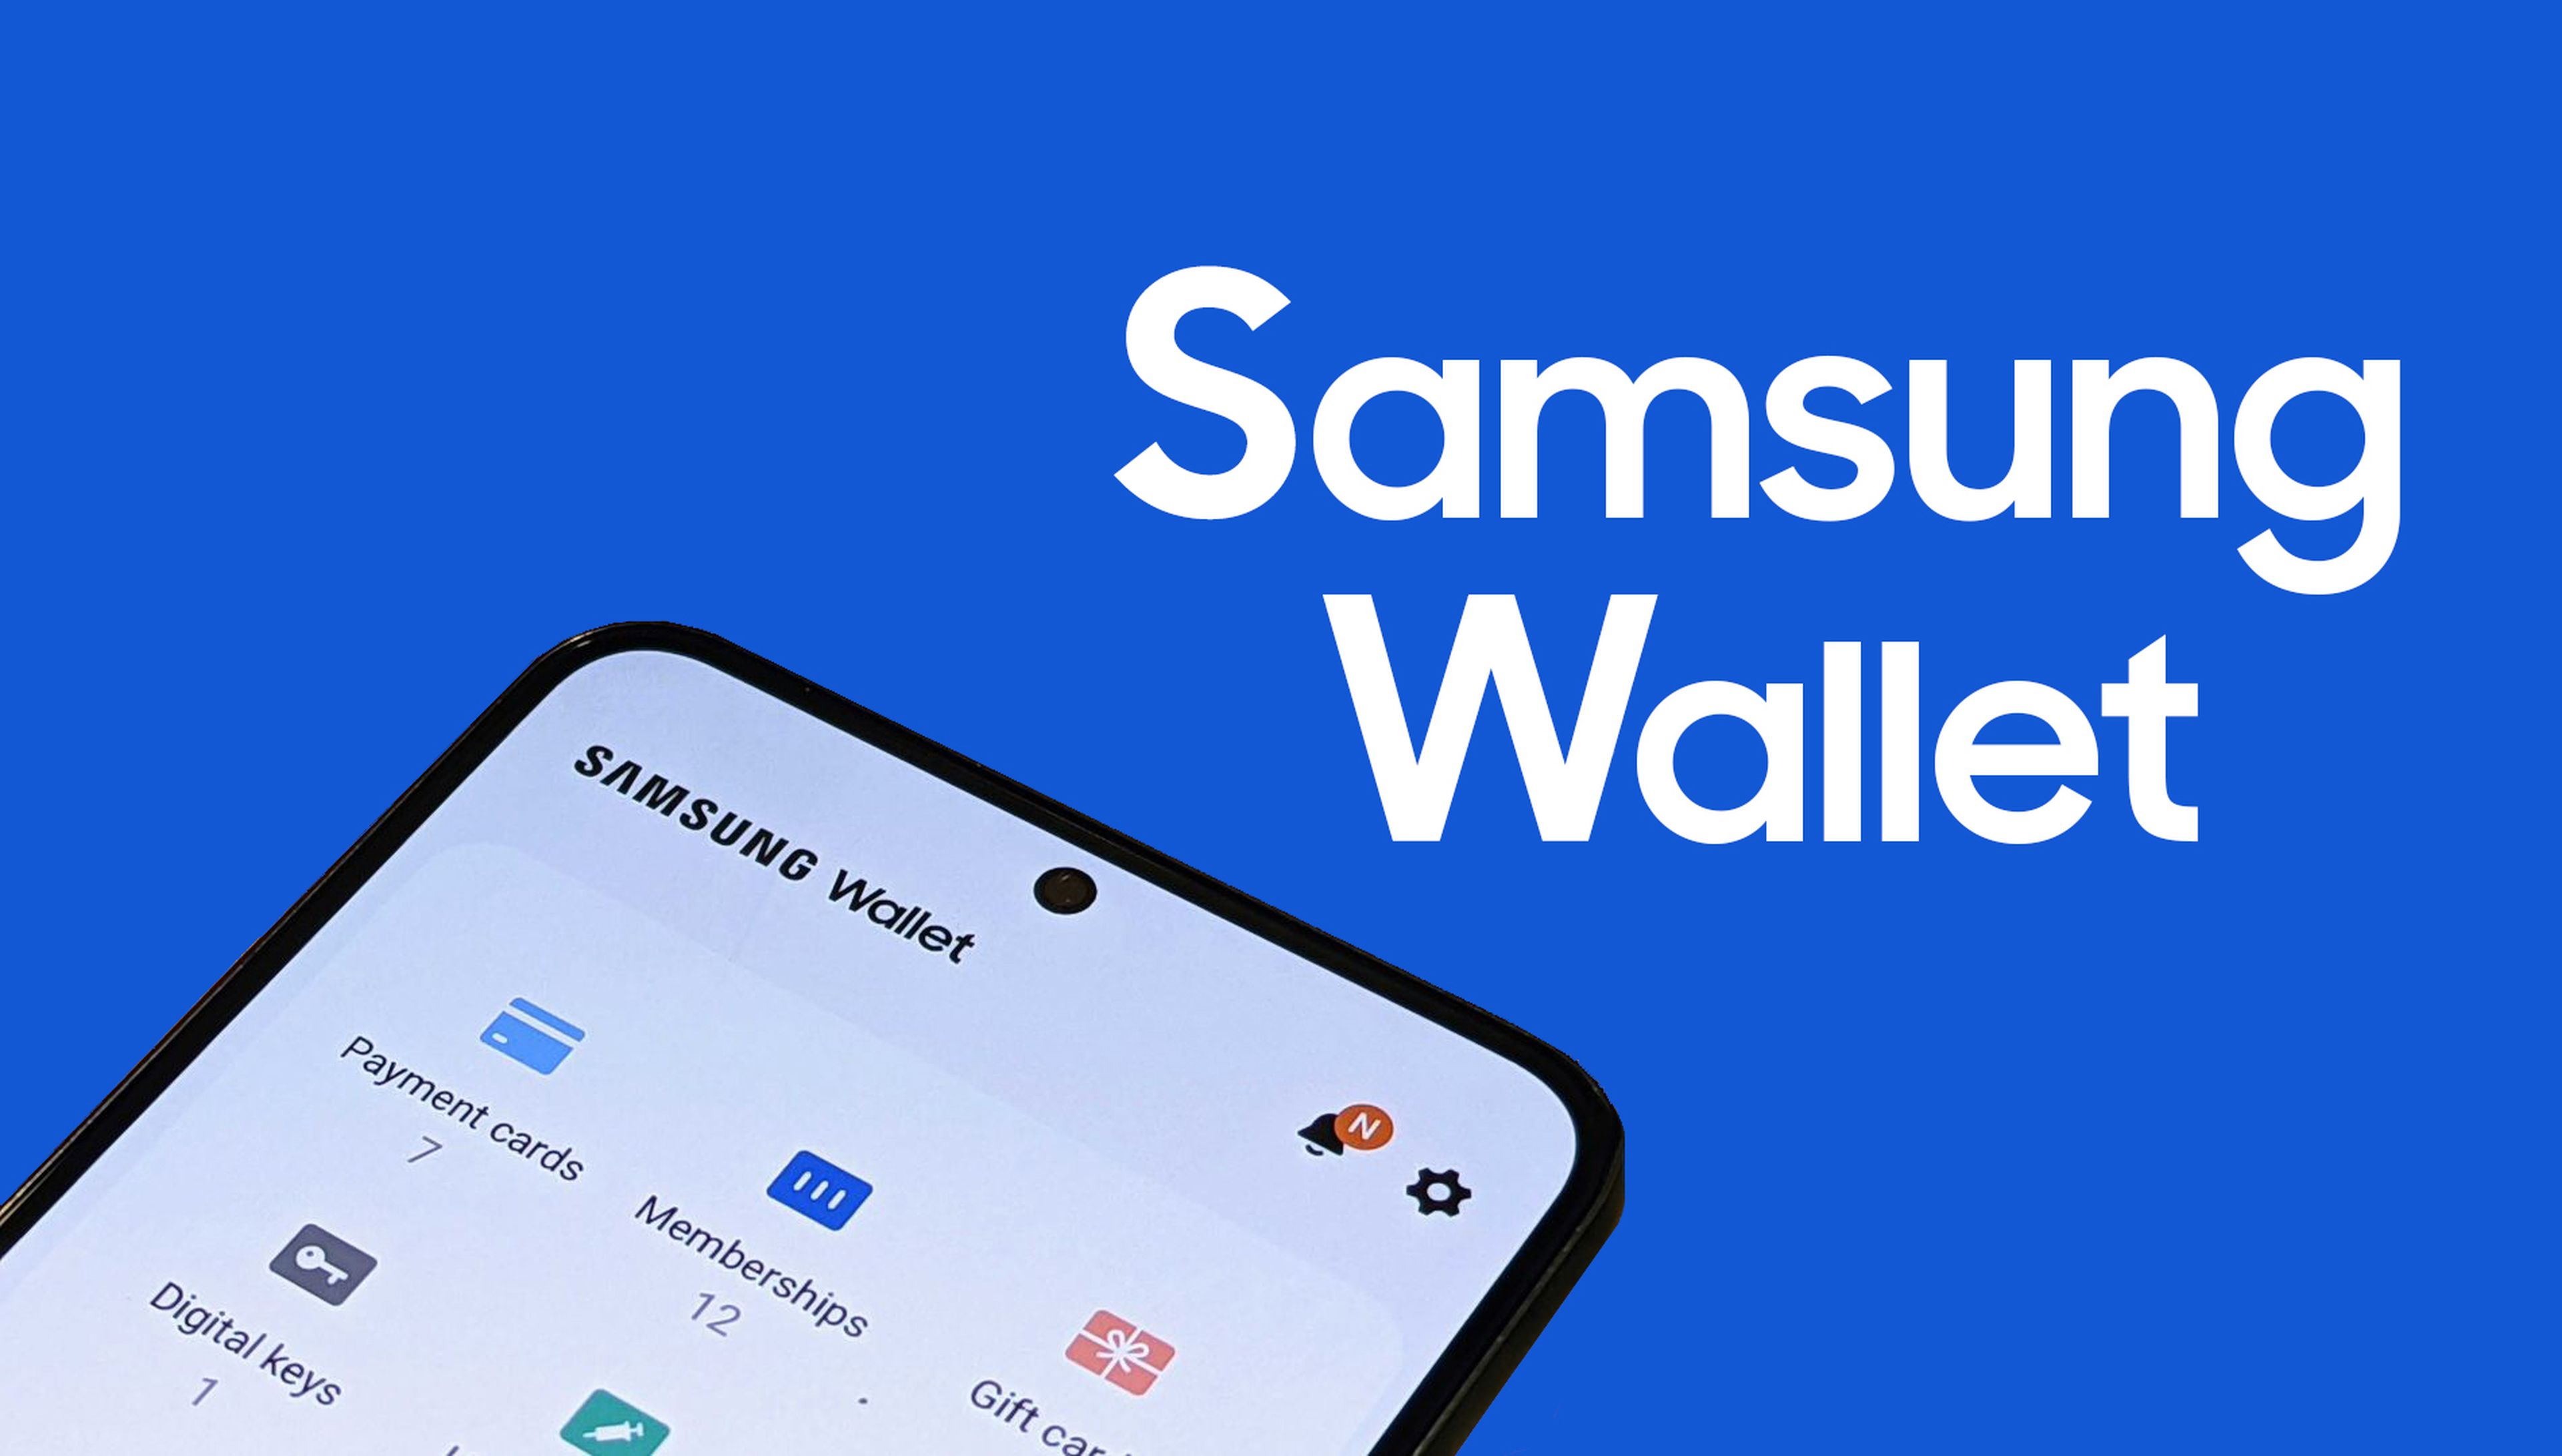 Samsung Wallet vs Apple Wallet: What's the difference?